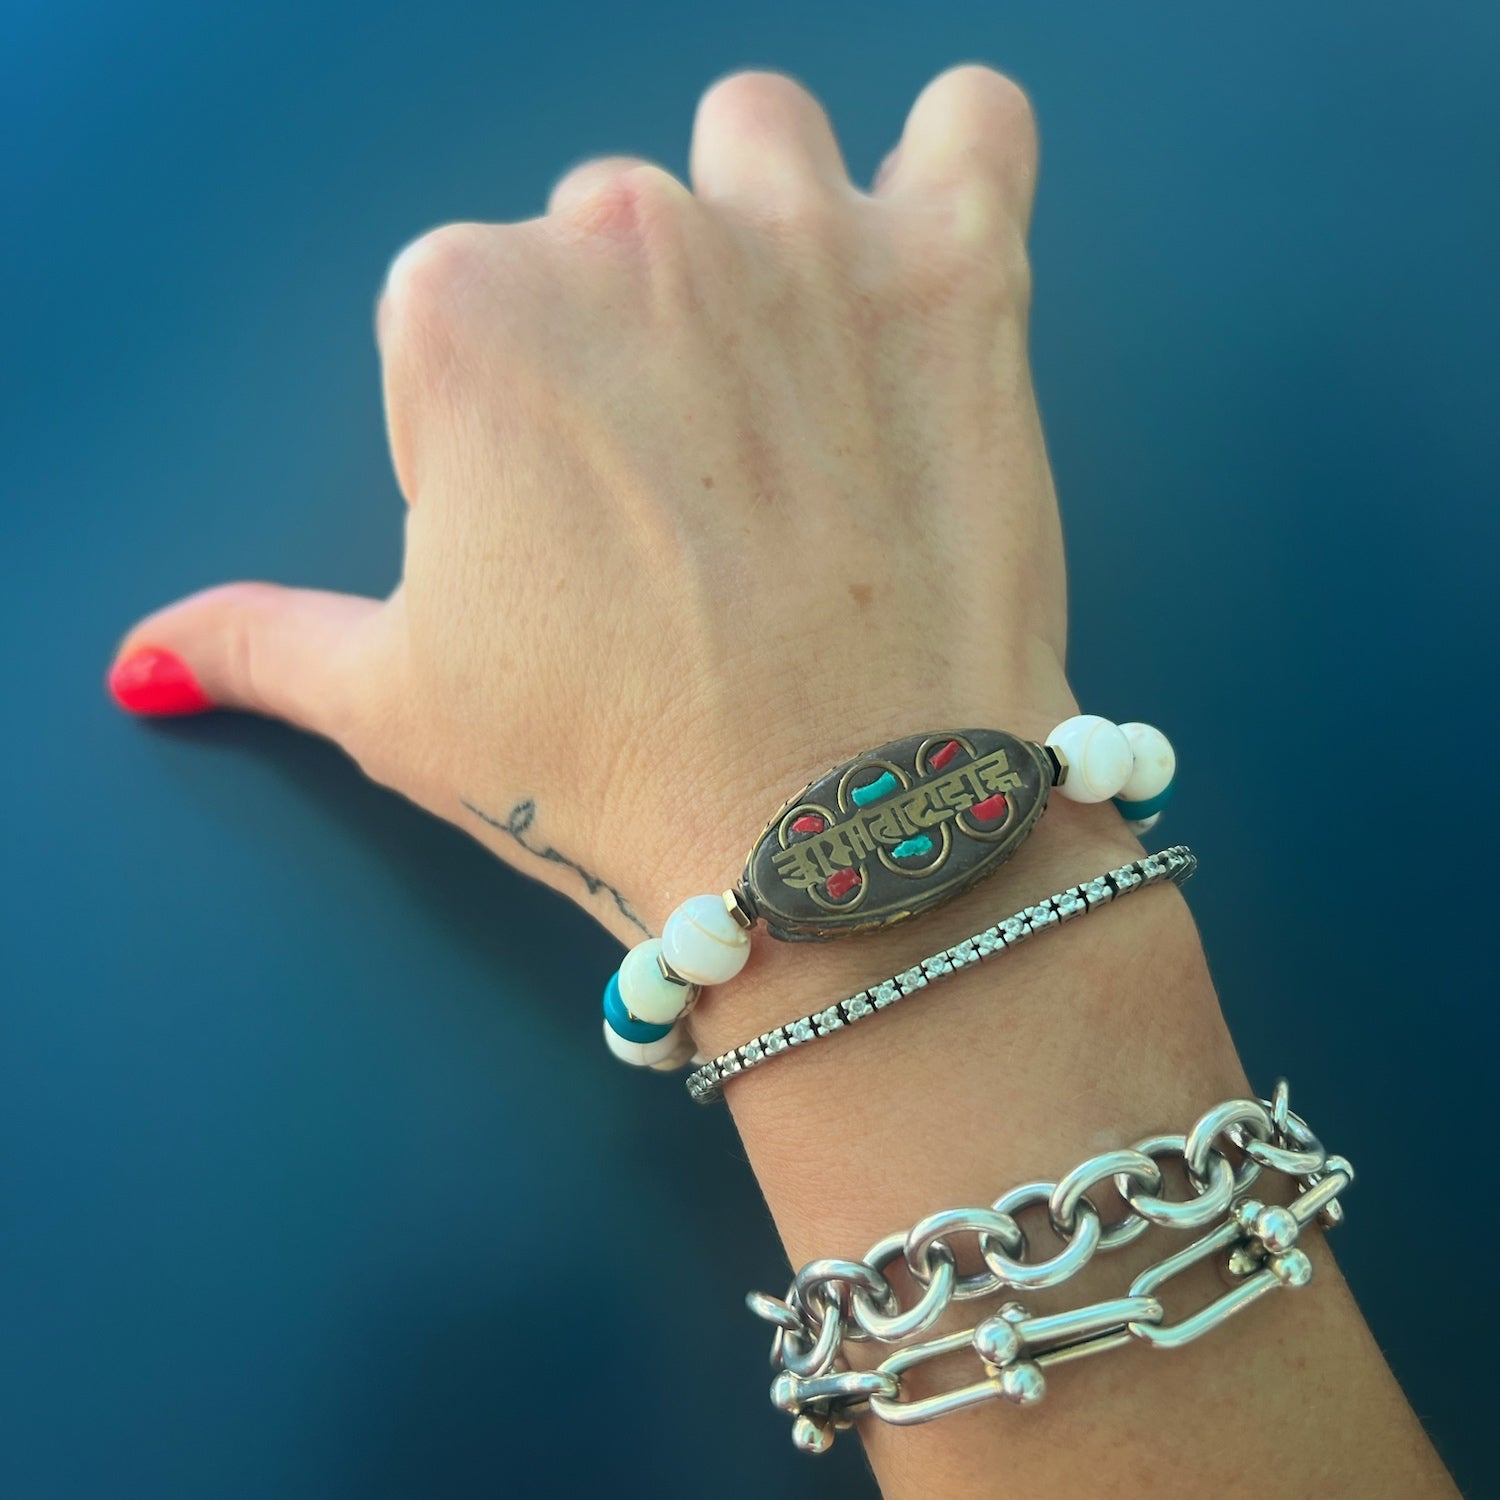 With the Om Mani Padme Hum Nepal Bracelet on her wrist, the hand model radiates a sense of inner peace and wisdom.